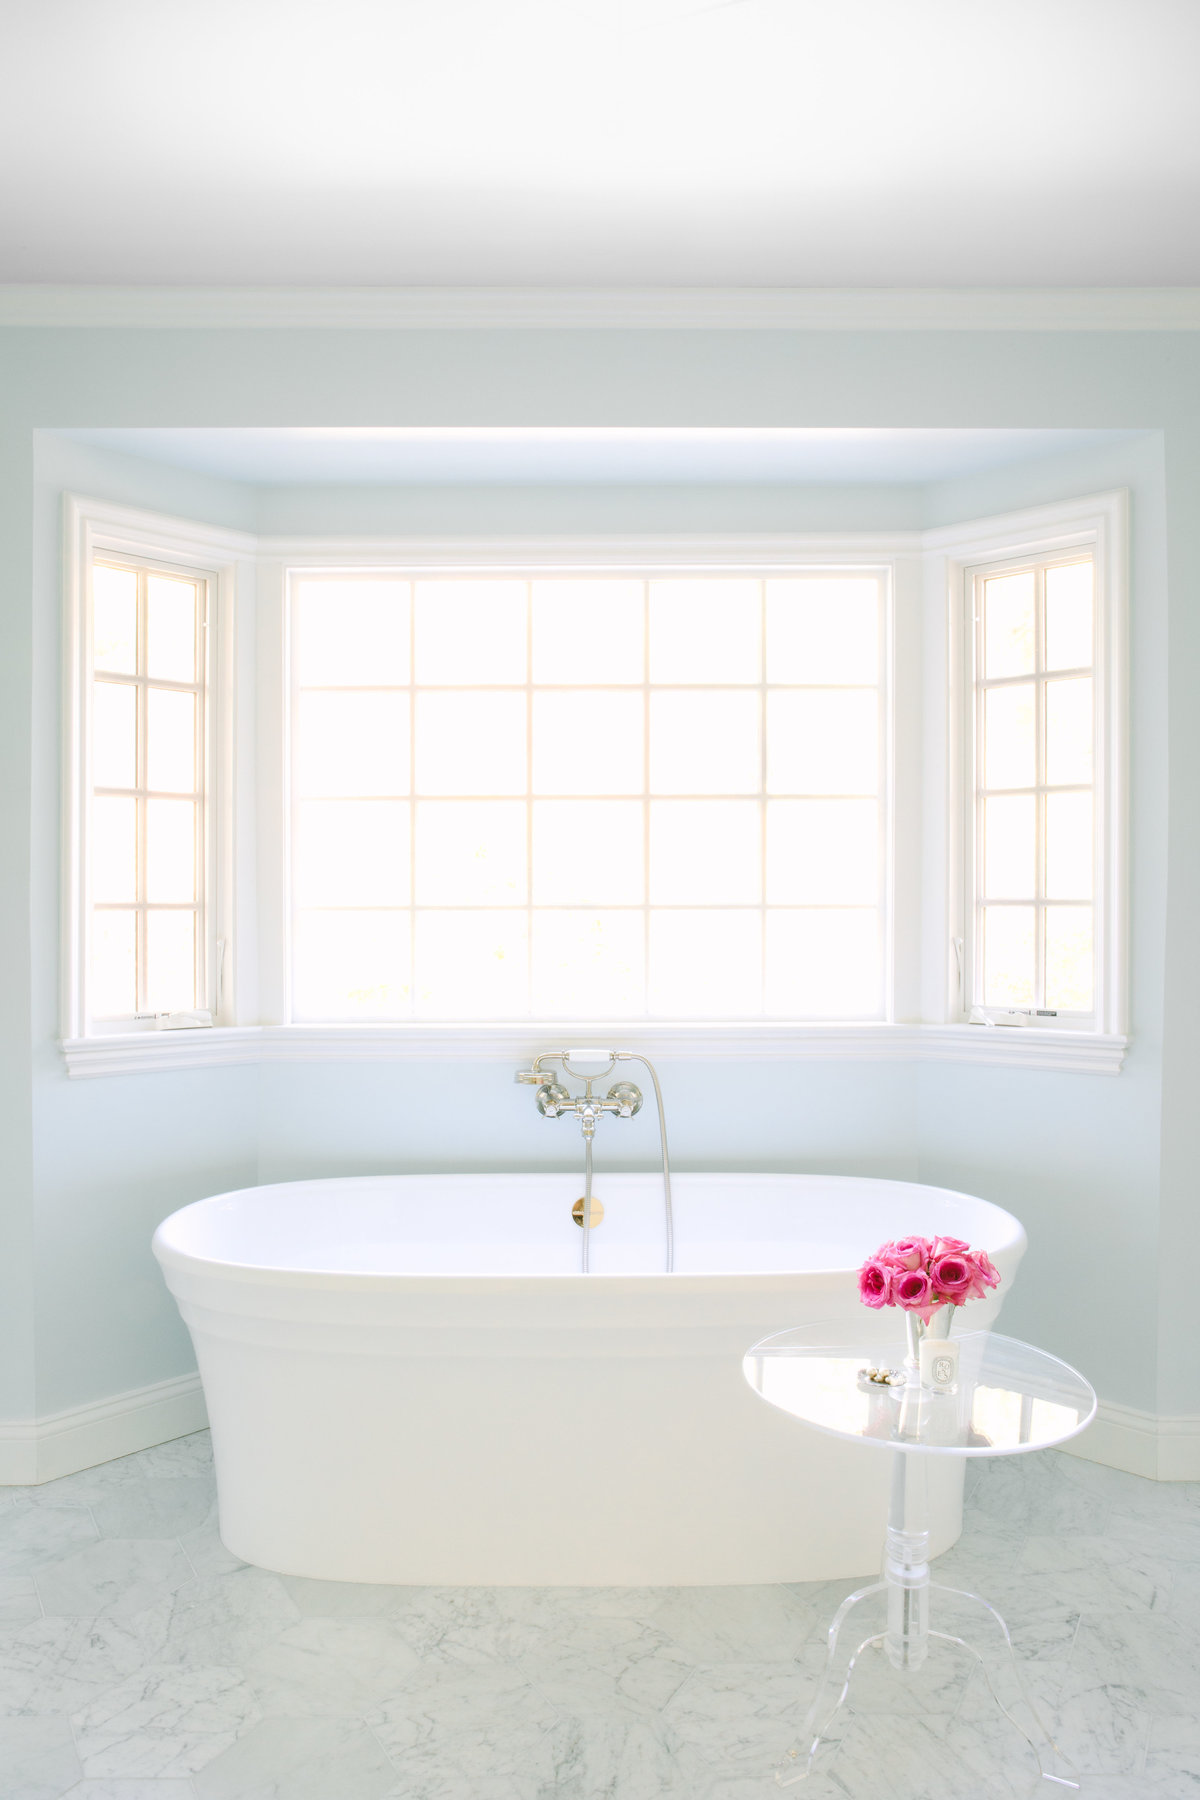 Bathroom with light blue walls, free standing Victoria and Albert tub, Lucite table, and Carrara marble hexagon floor